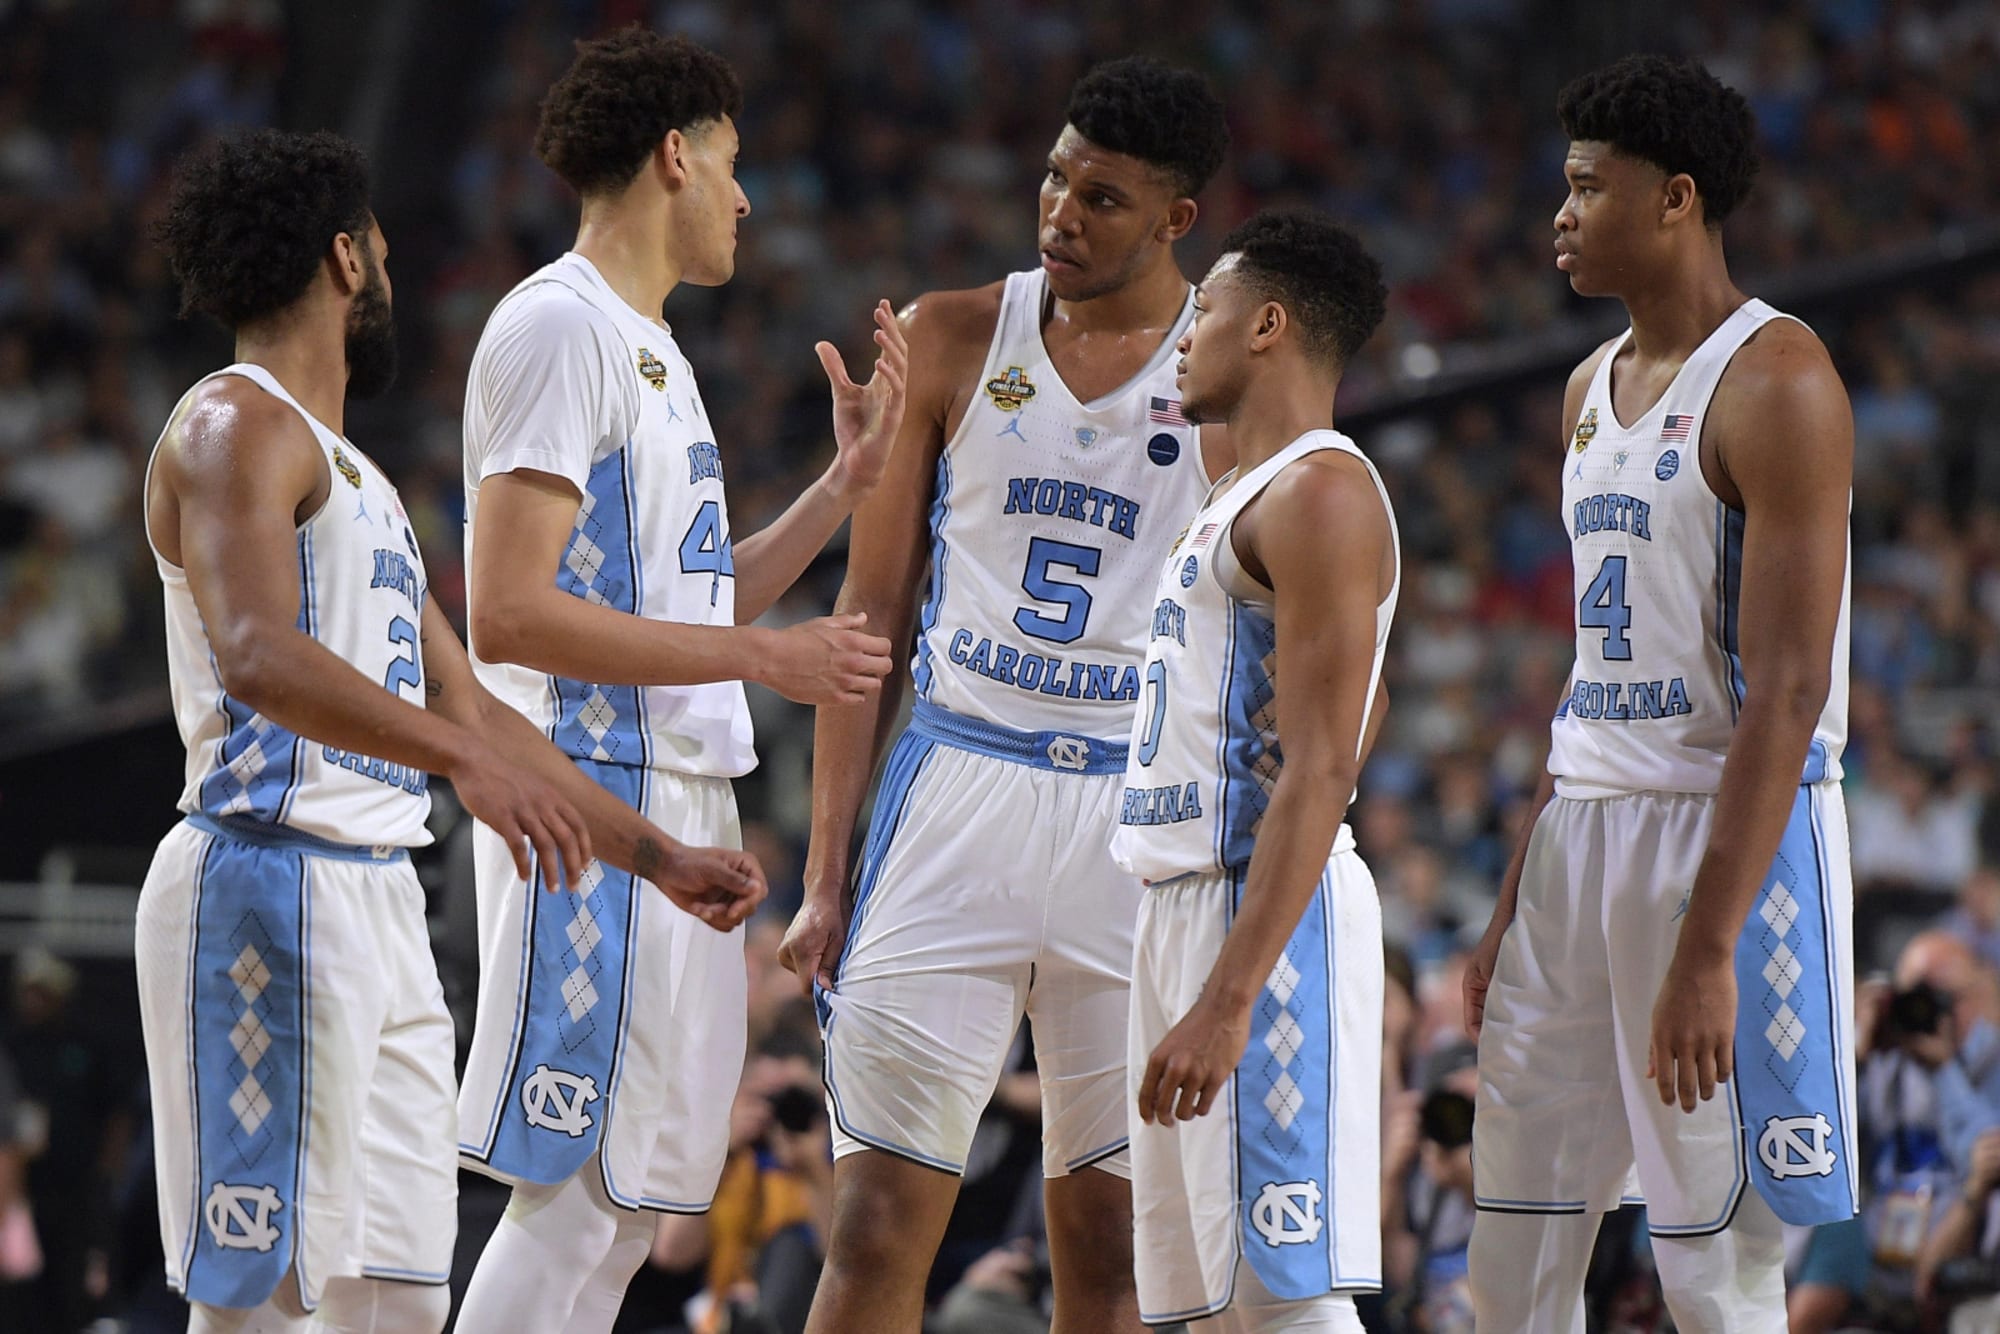 UNC basketball players, local stores teaming up to thrive in NIL era - The  Daily Tar Heel